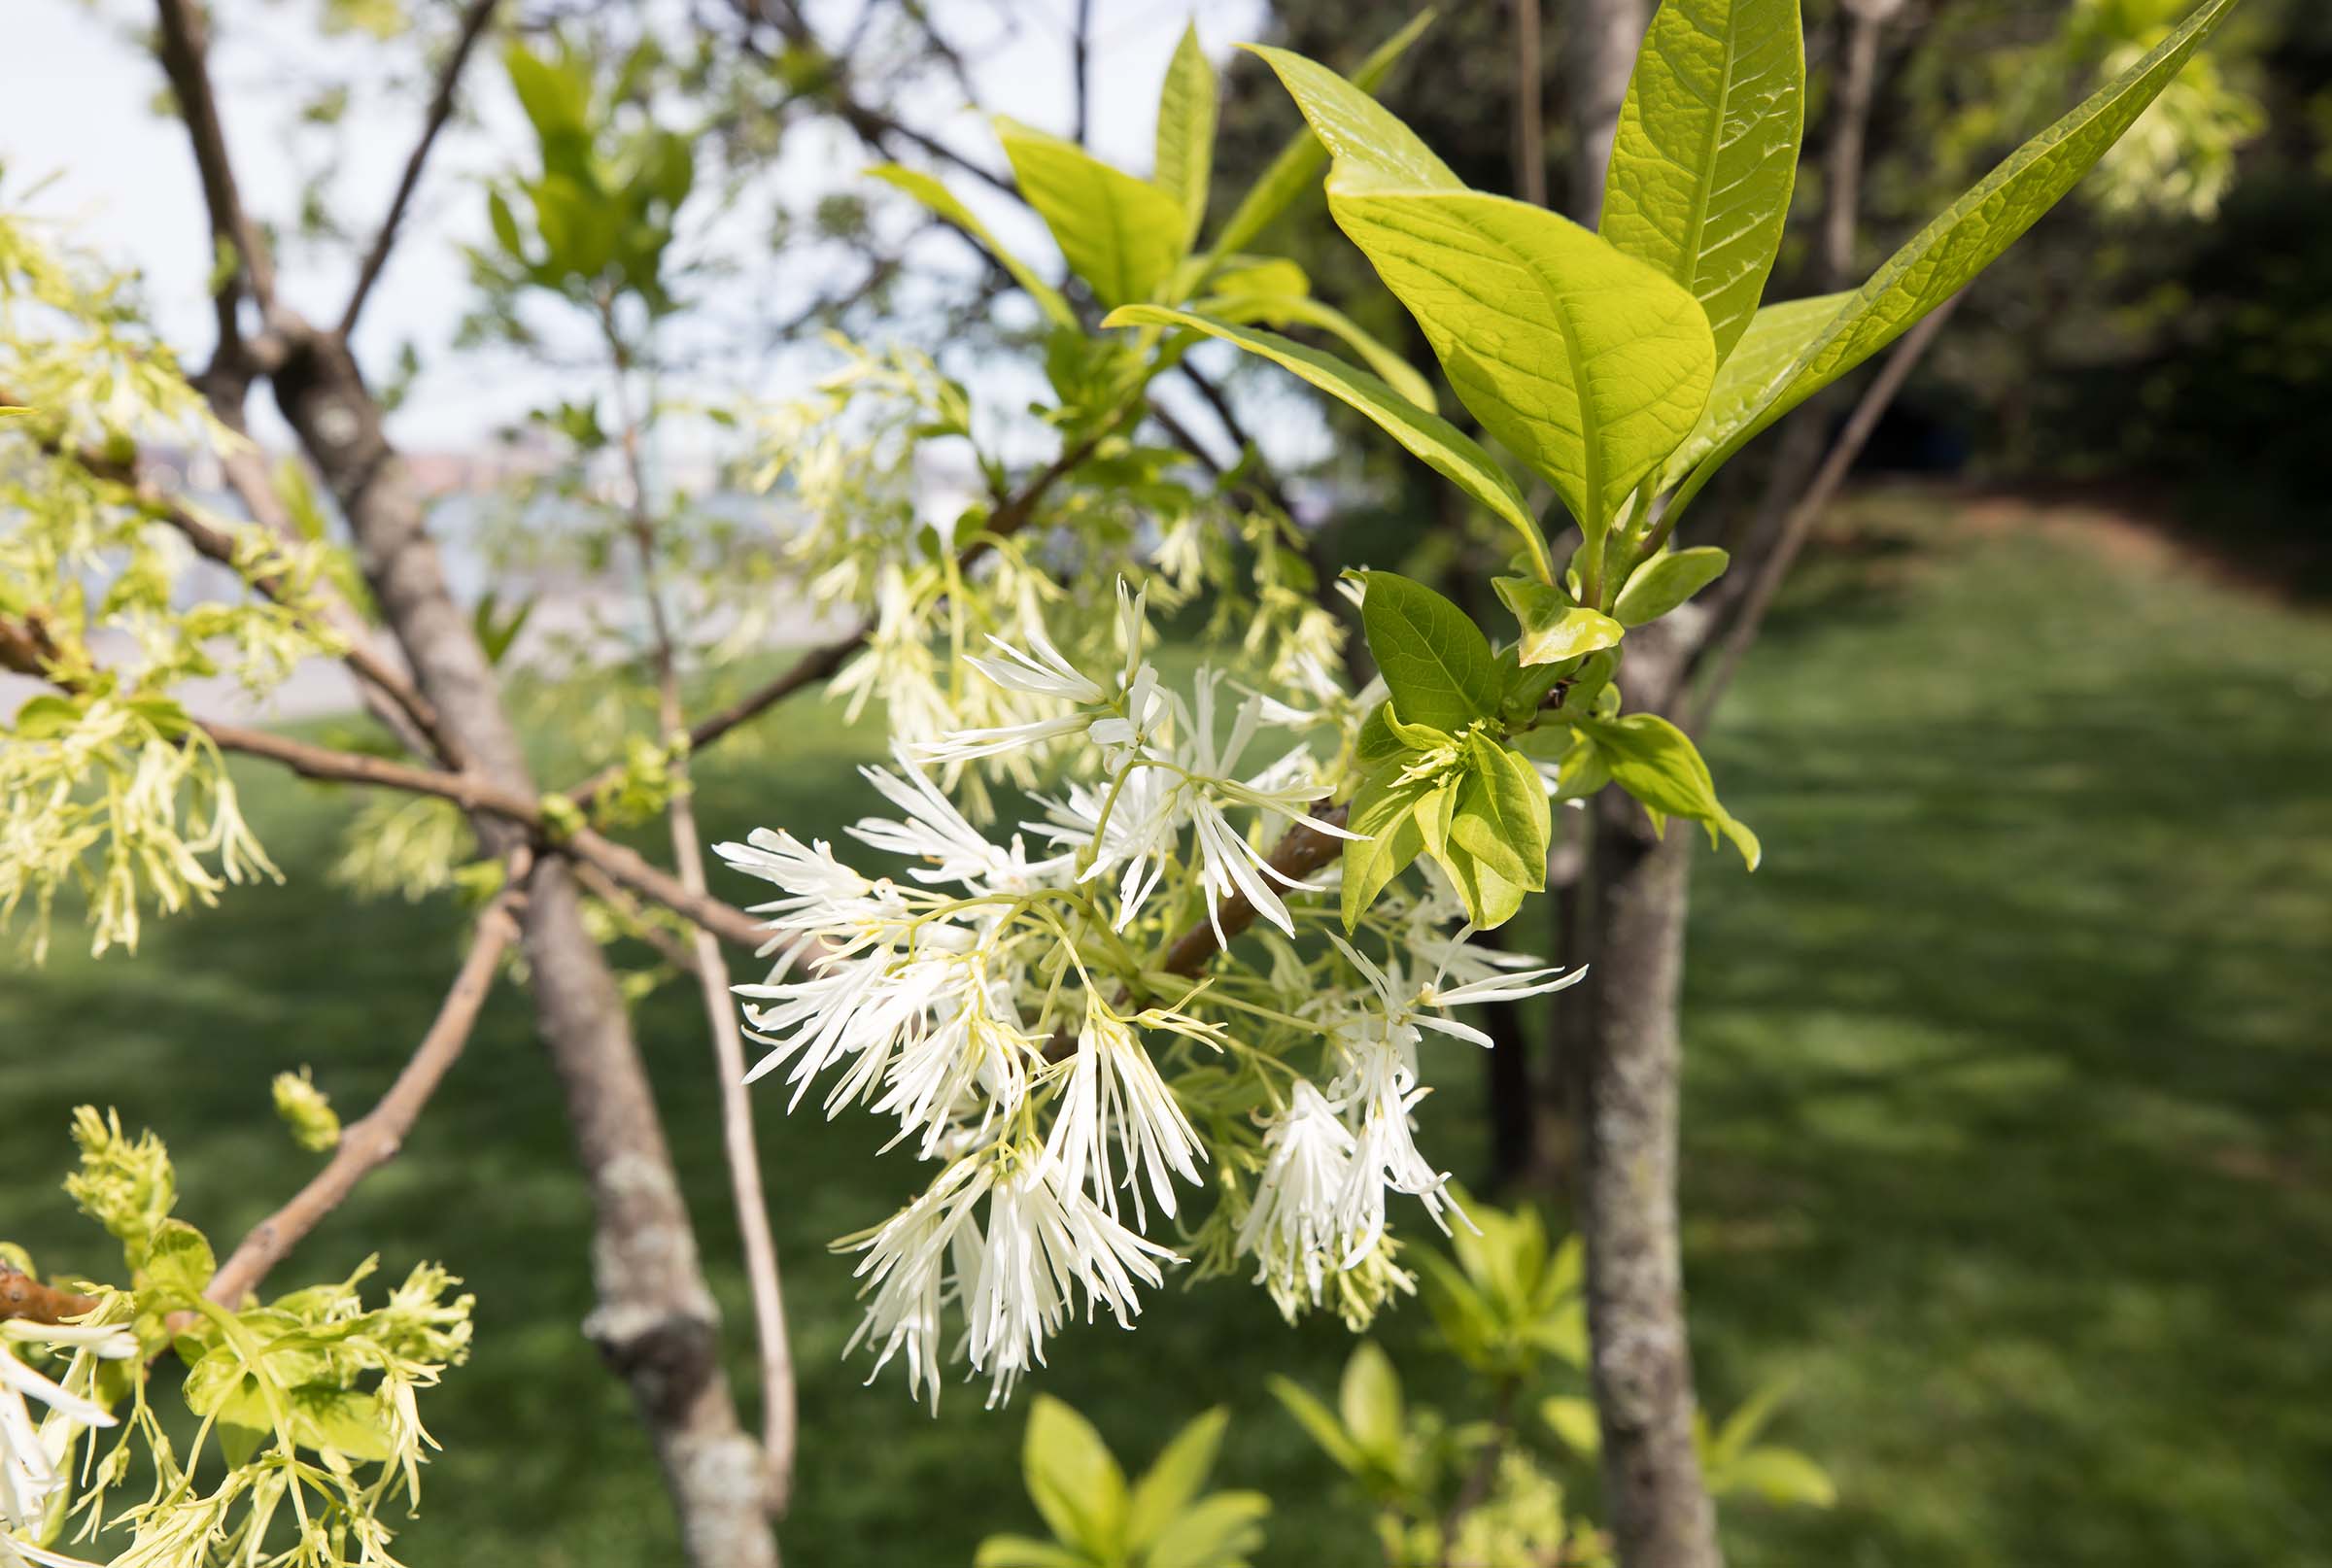 The white blossoms on the fringe trees dangle in the wind